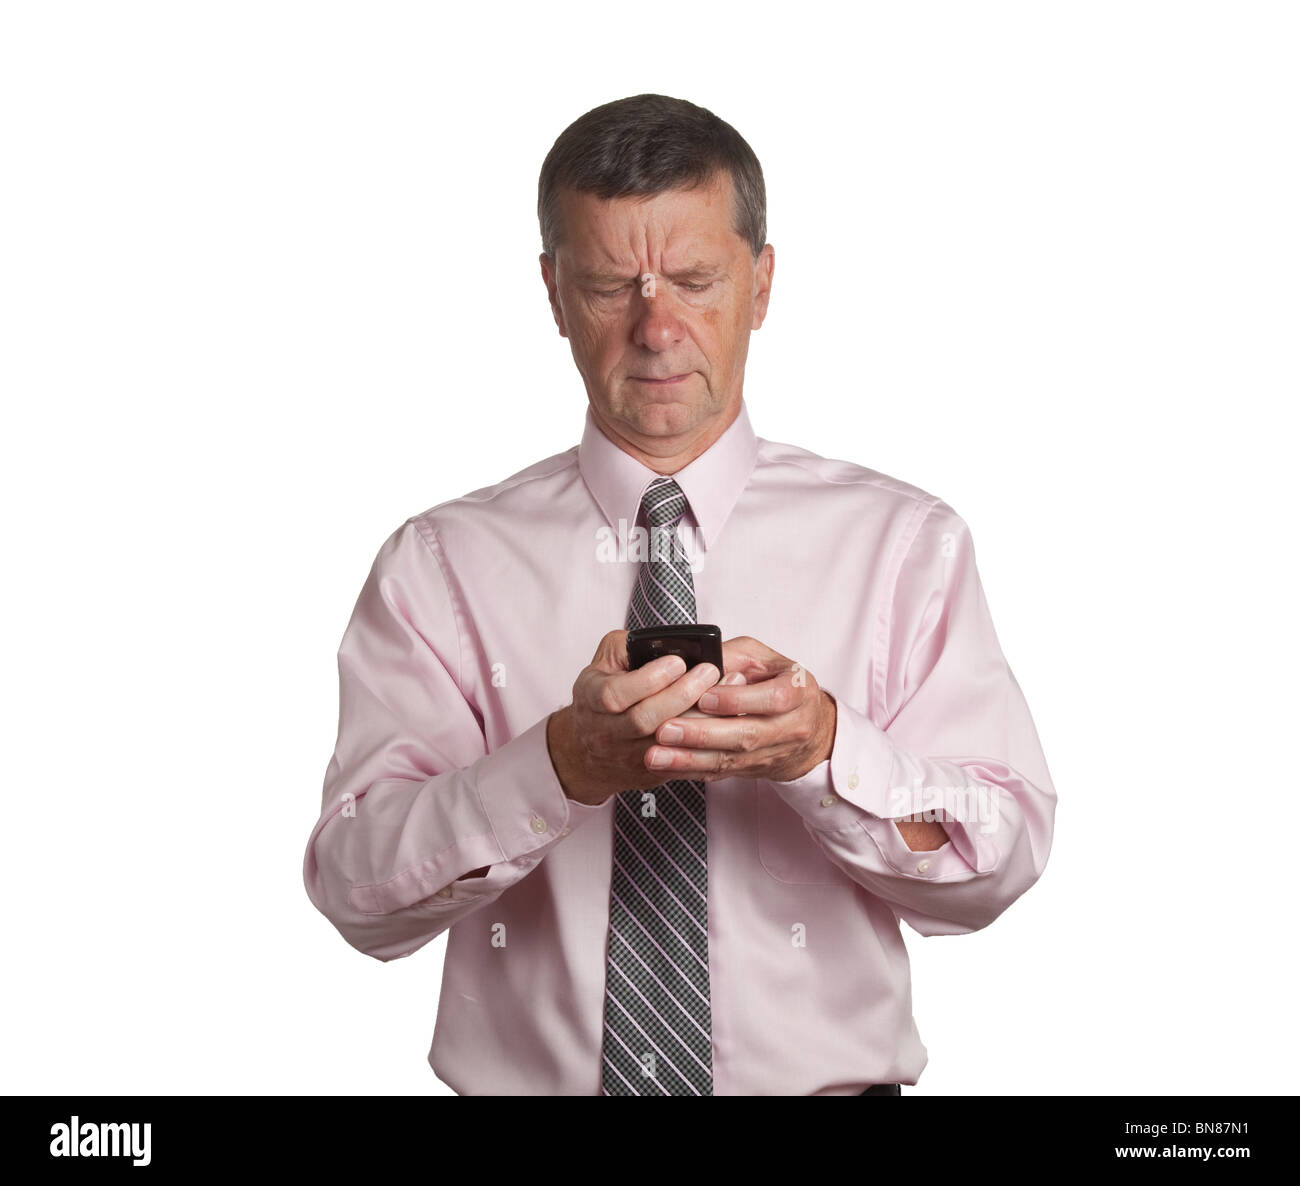 Senior businessman making an email on a blackberry type device Stock Photo